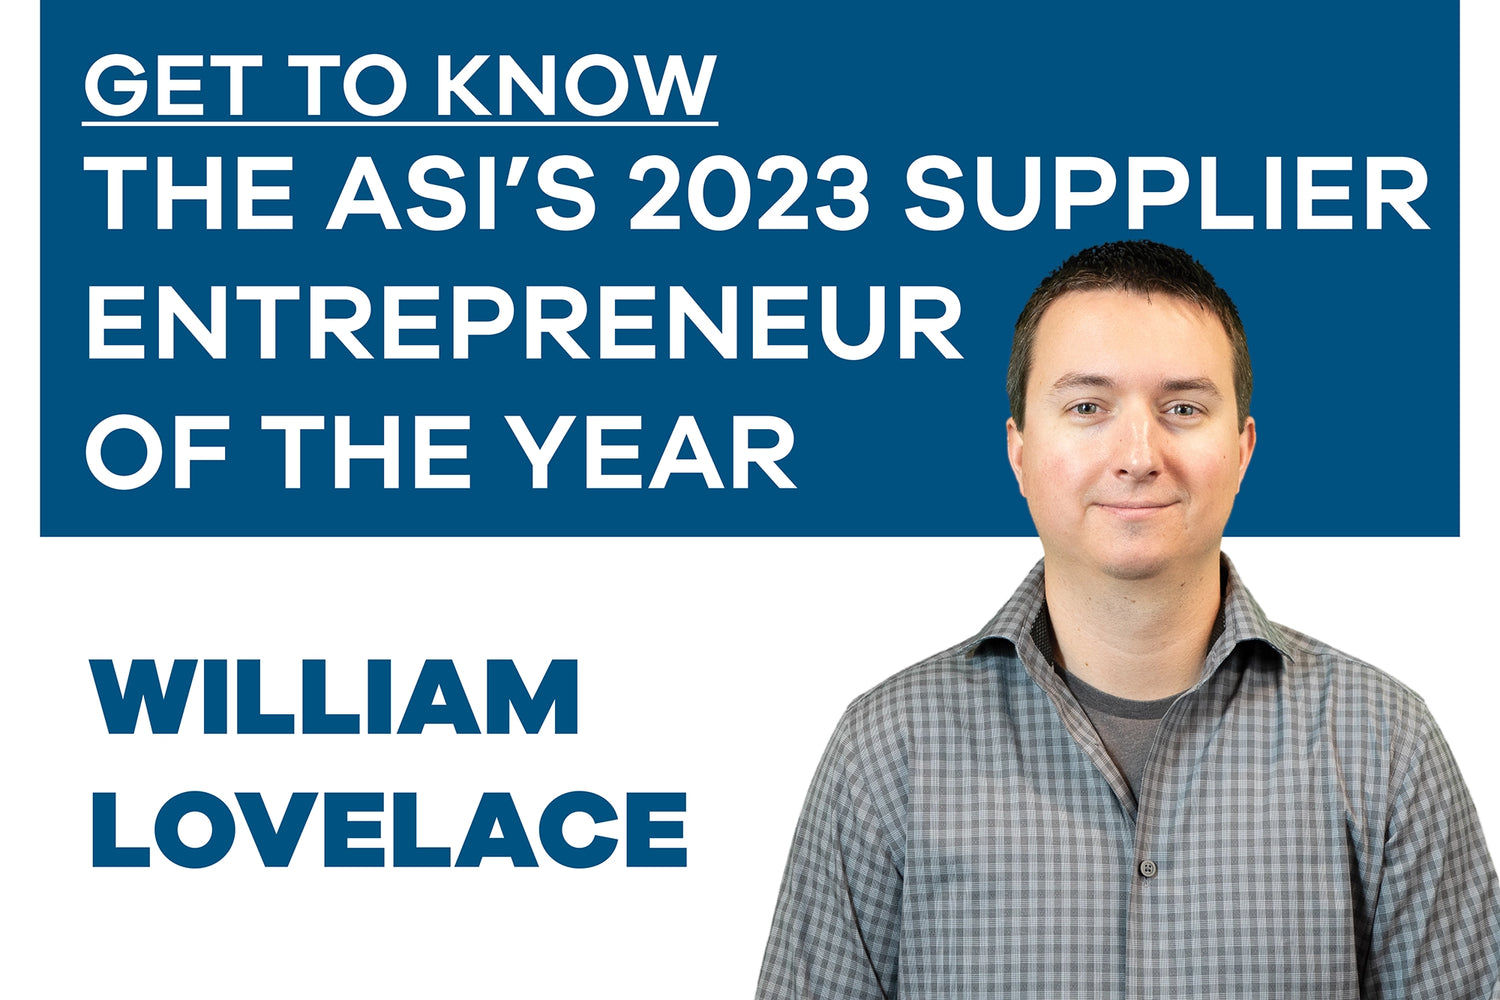 Get to Know the ASI’s 2023 Supplier Entrepreneur of the Year William Lovelace